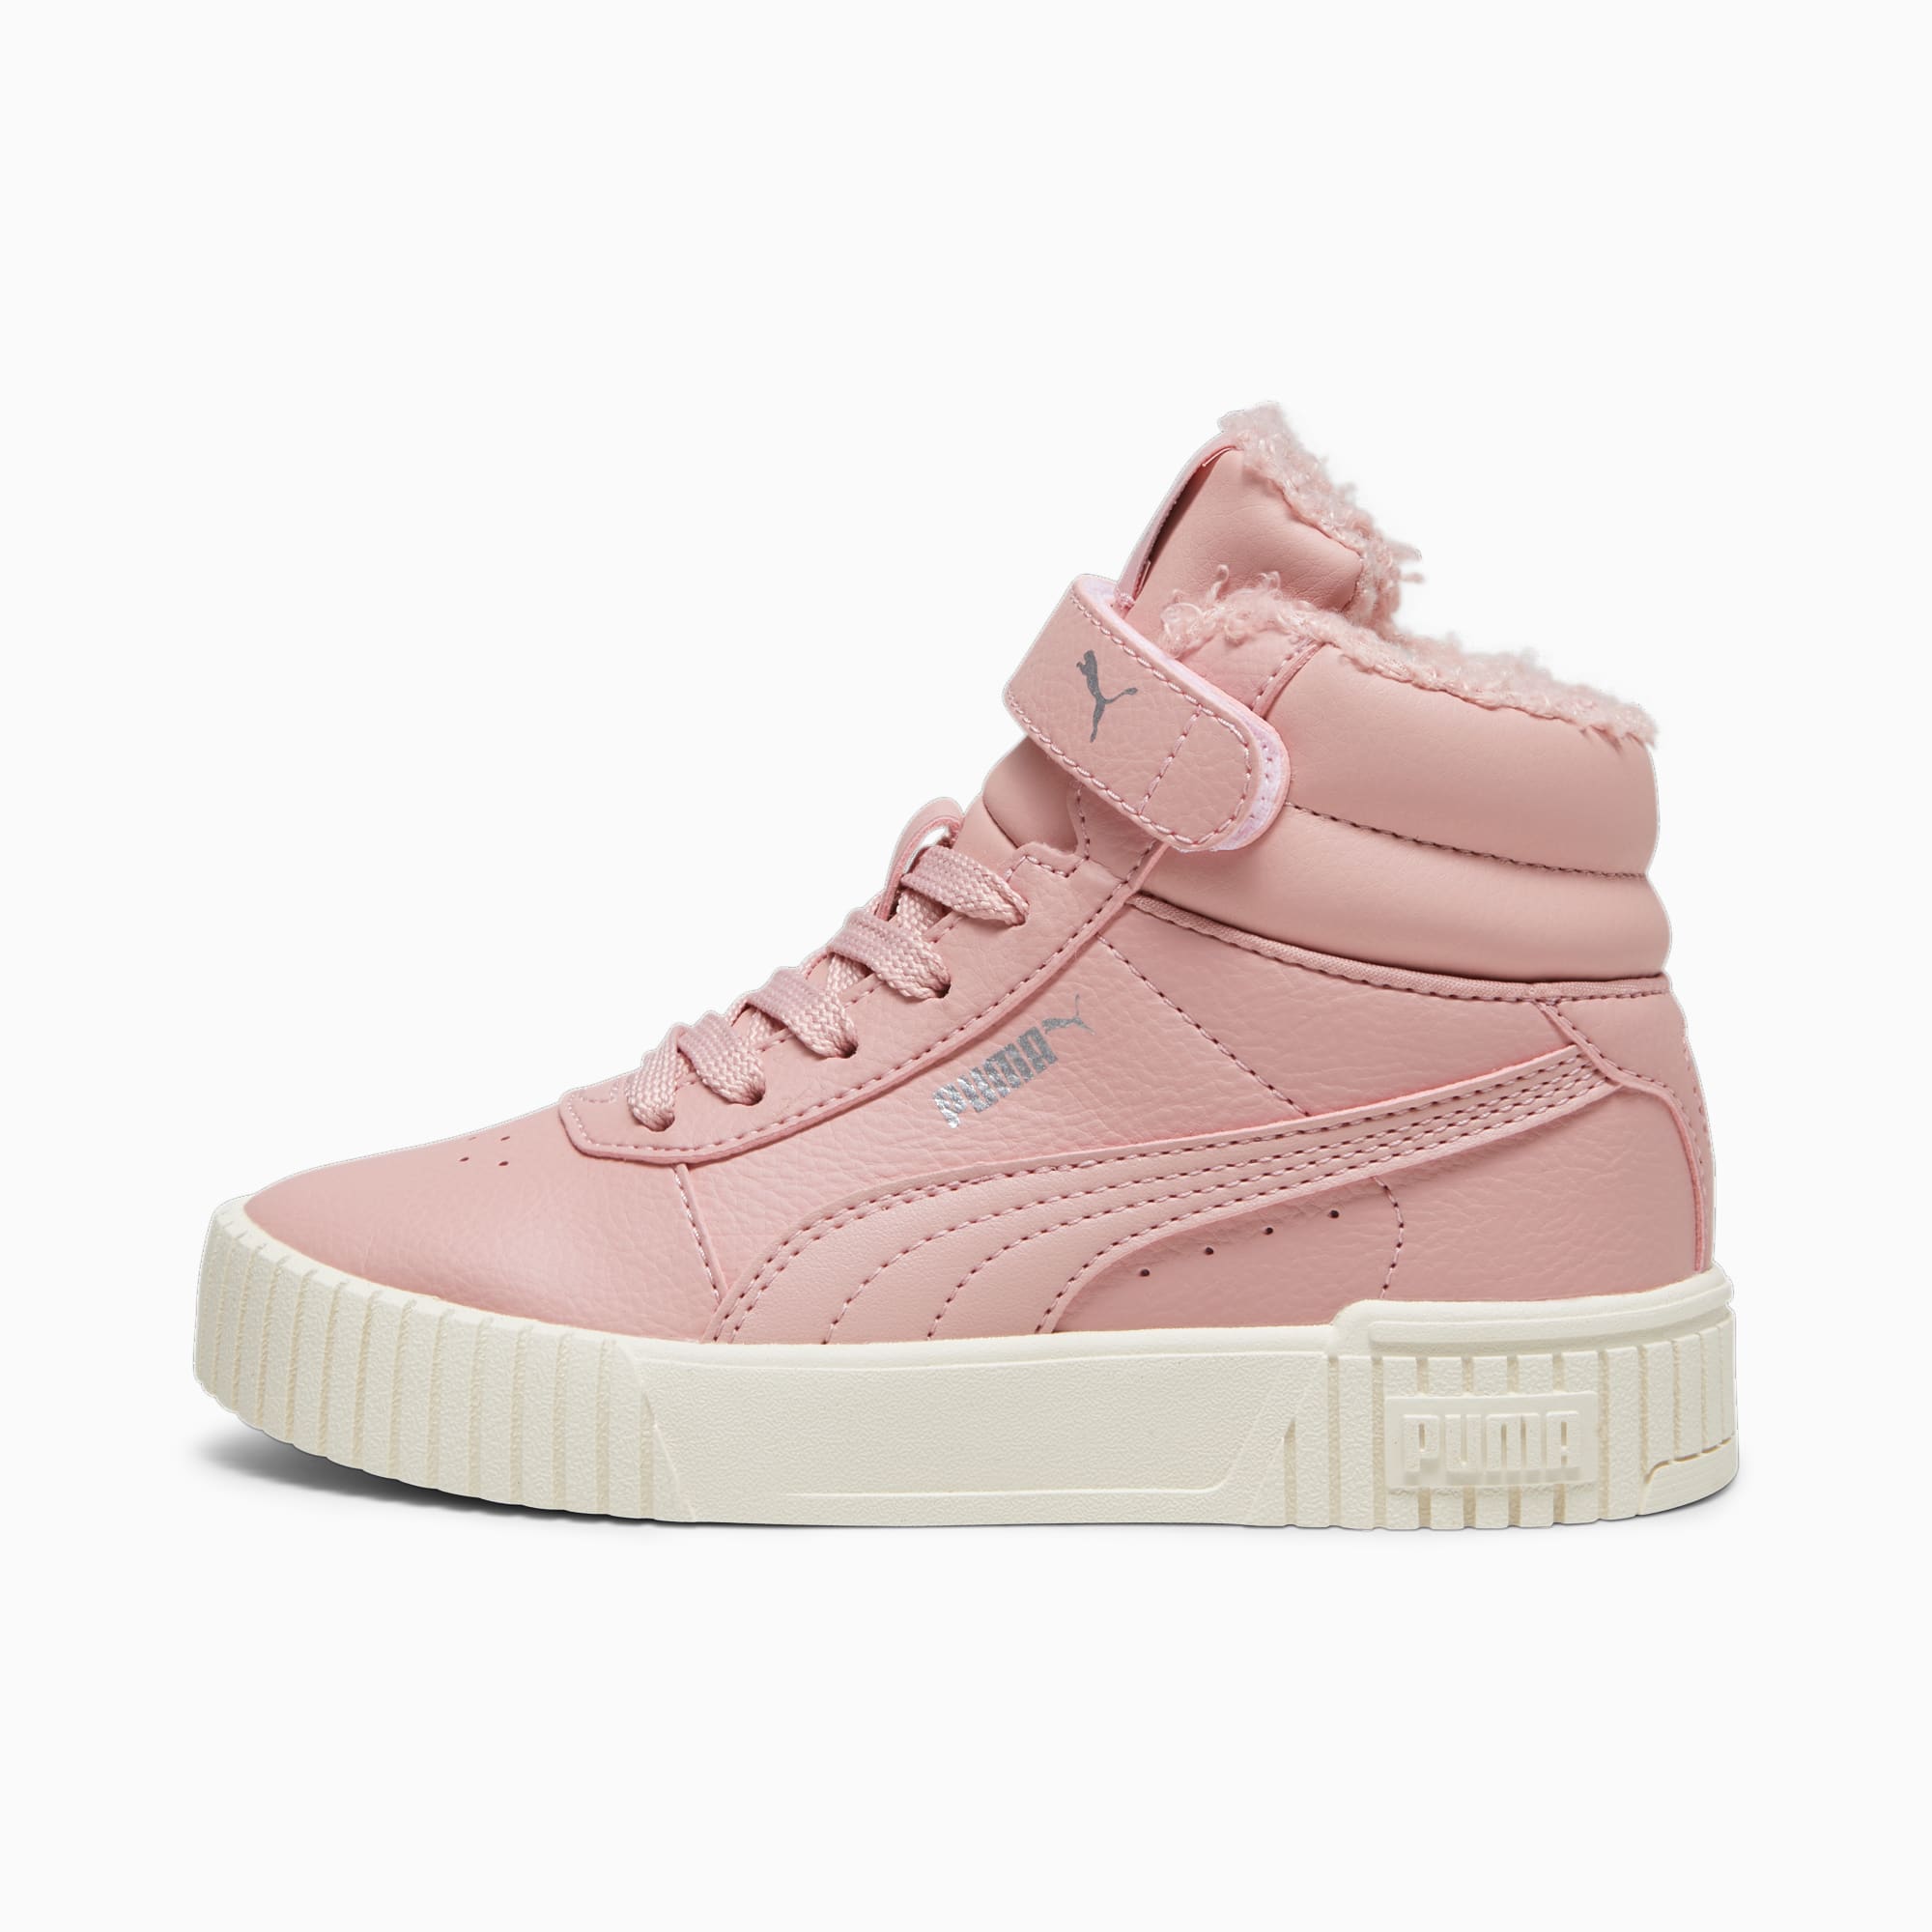 PUMA Carina 2.0 Mid Winter Sneakers Kids, Future Pink/Silver/Alpine Snow, Size 27,5, Shoes